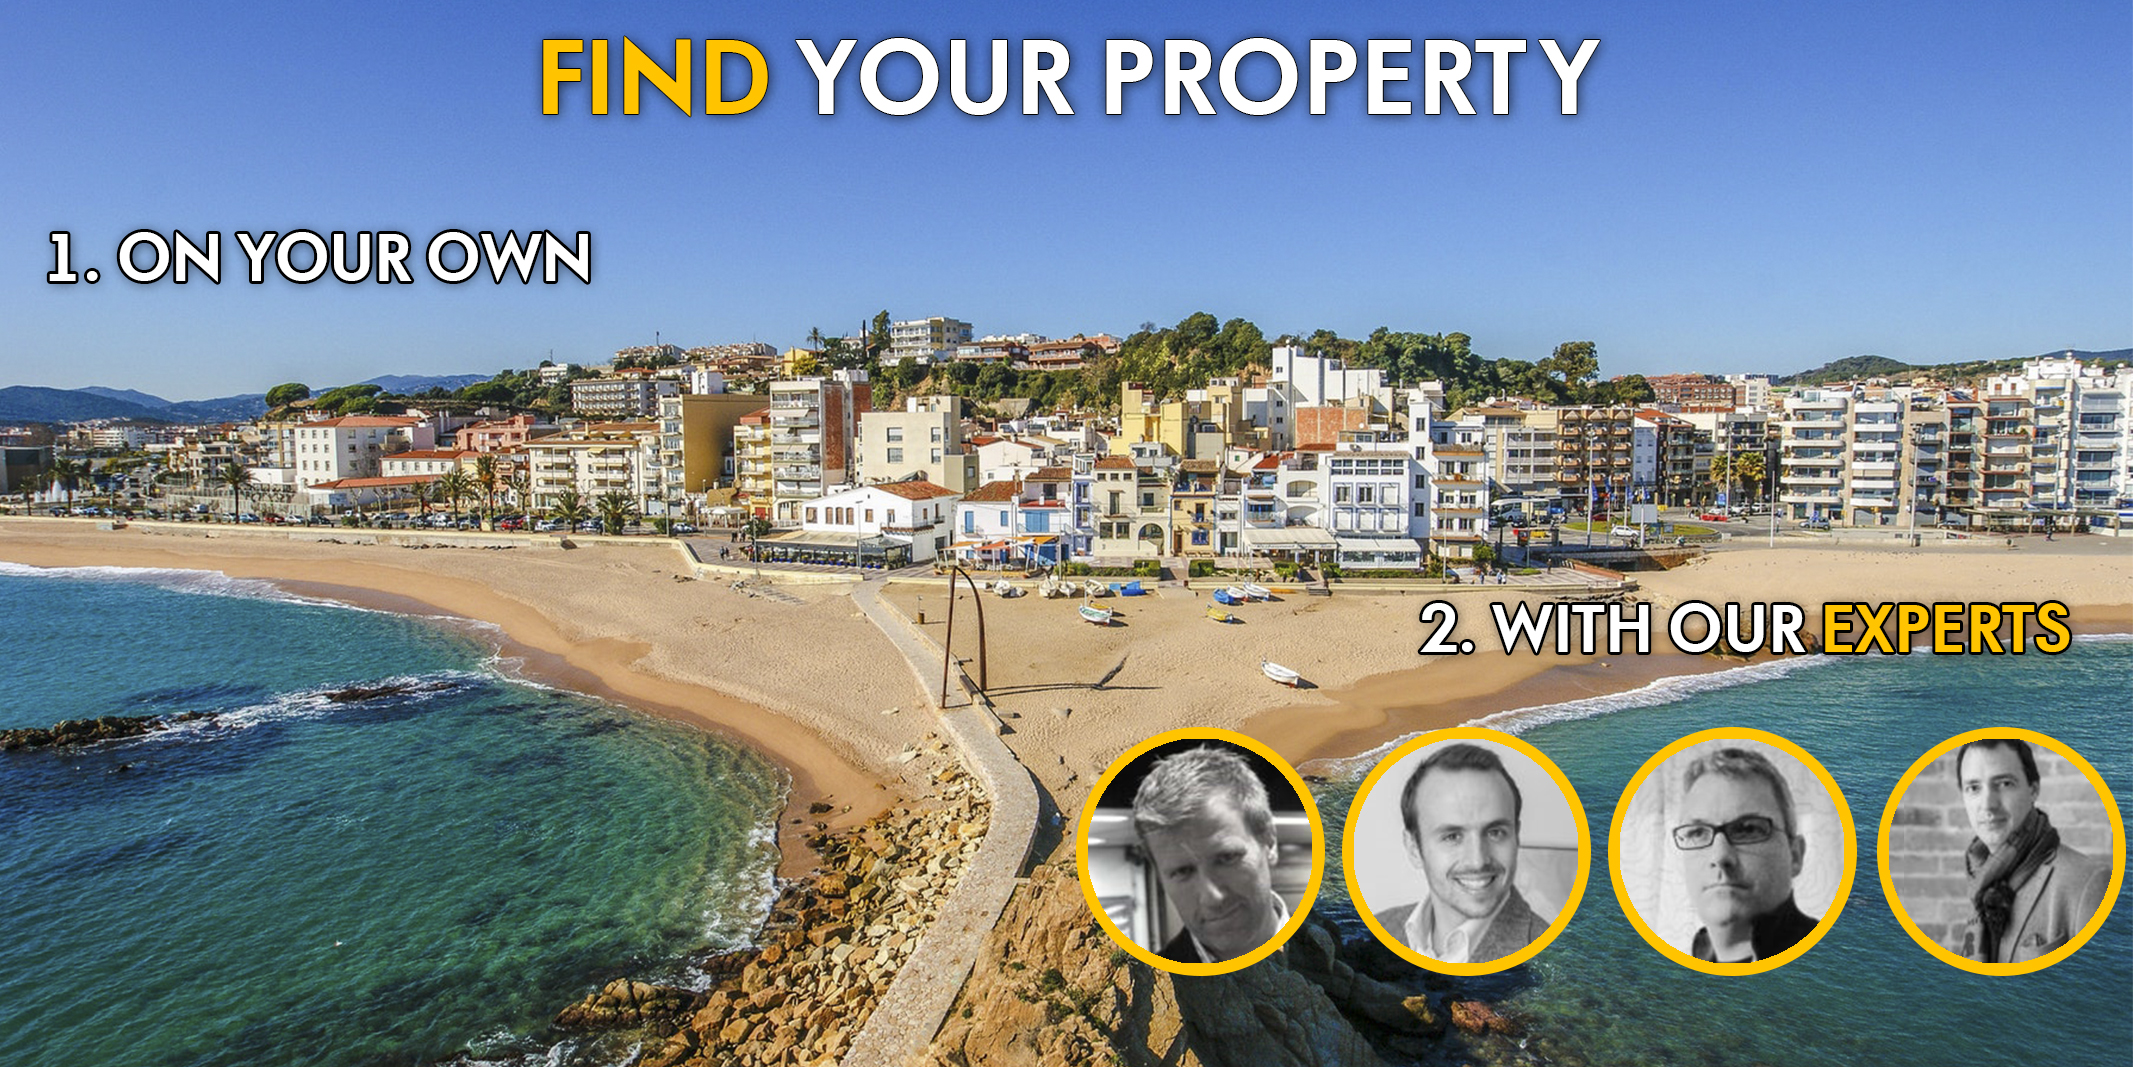 Buying your property in Spain?